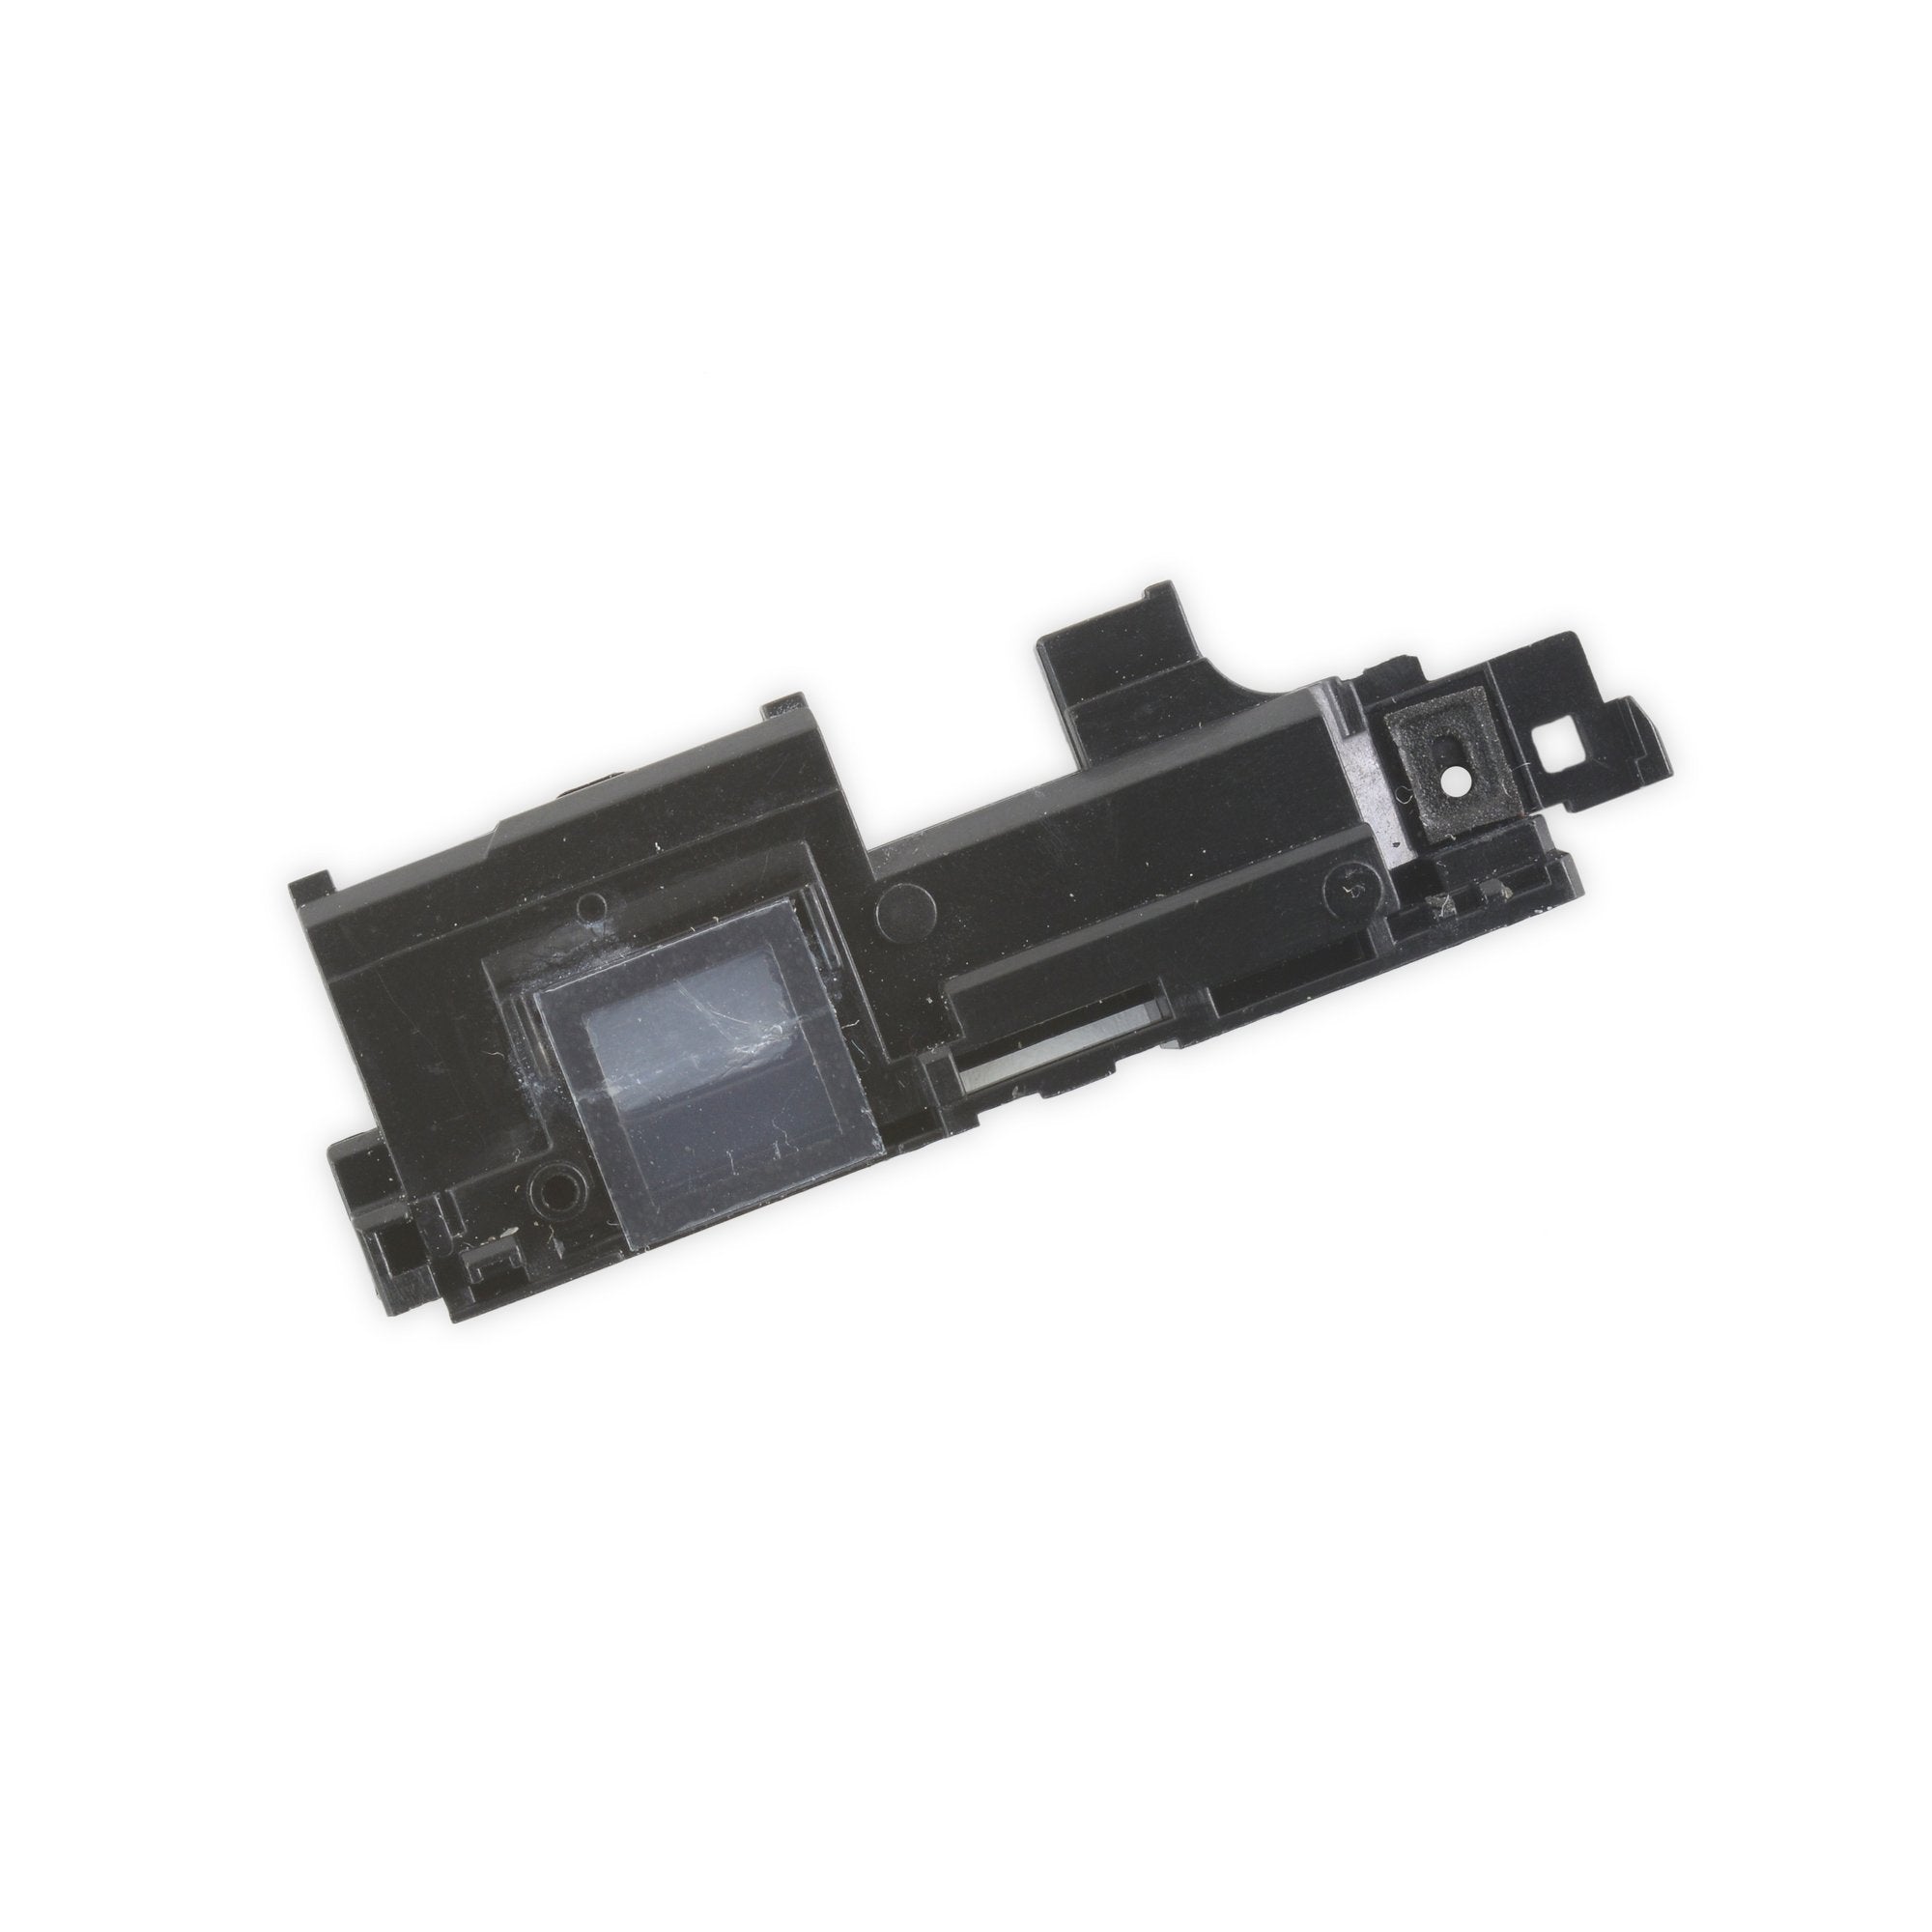 Sony Xperia Z1 Compact Speaker Assembly